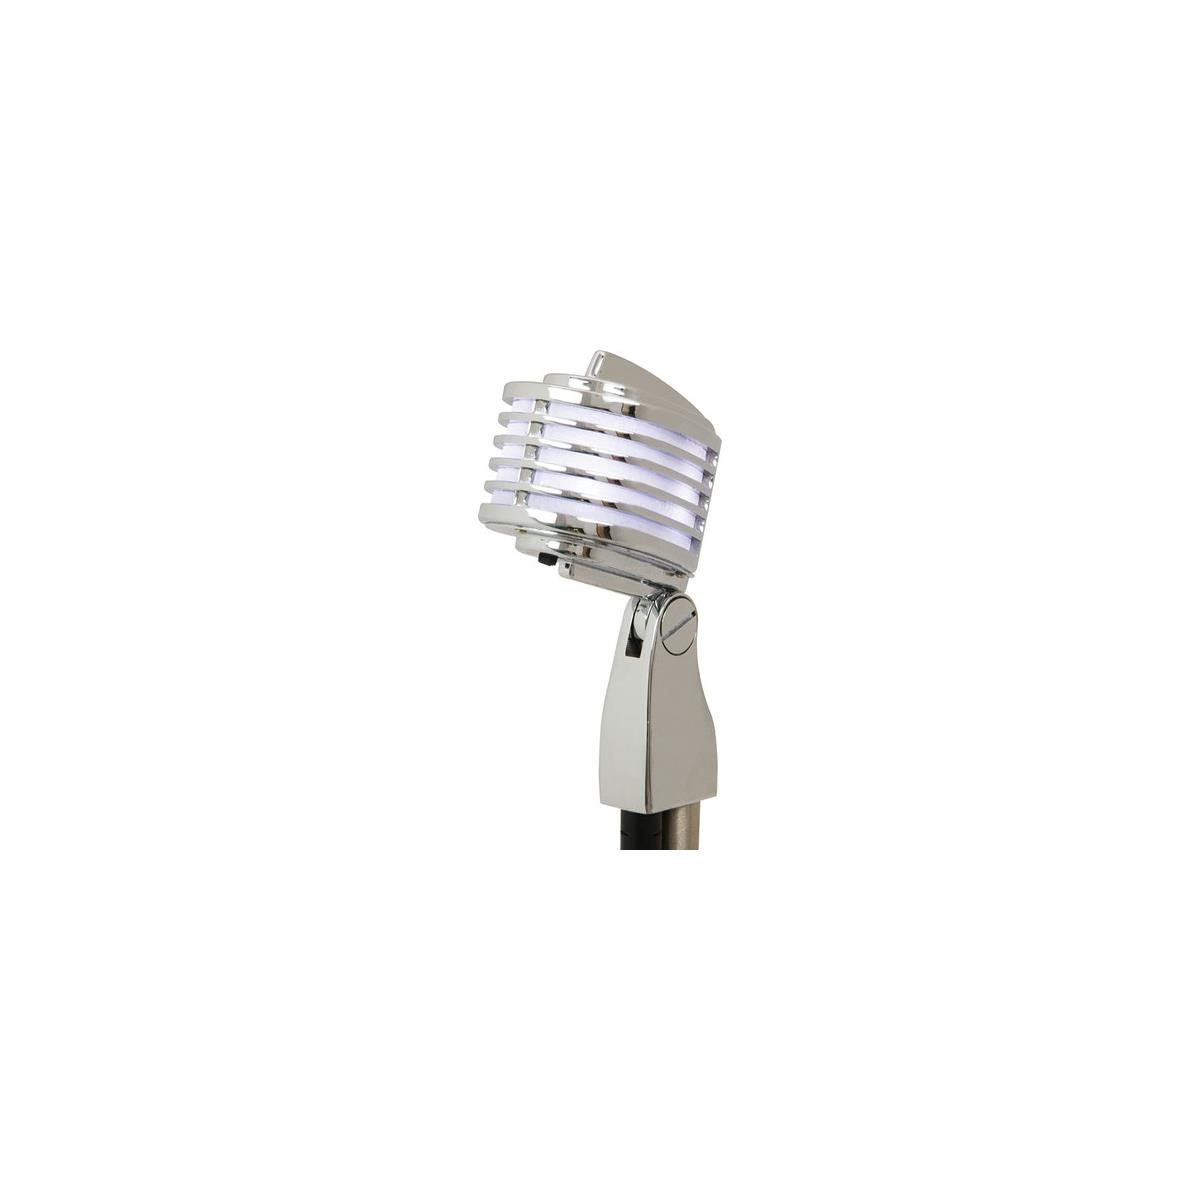 Heil Sound The Fin Dynamic Retro Styled Microphone, Chrome Body, White LED -  THE FIN WHITE